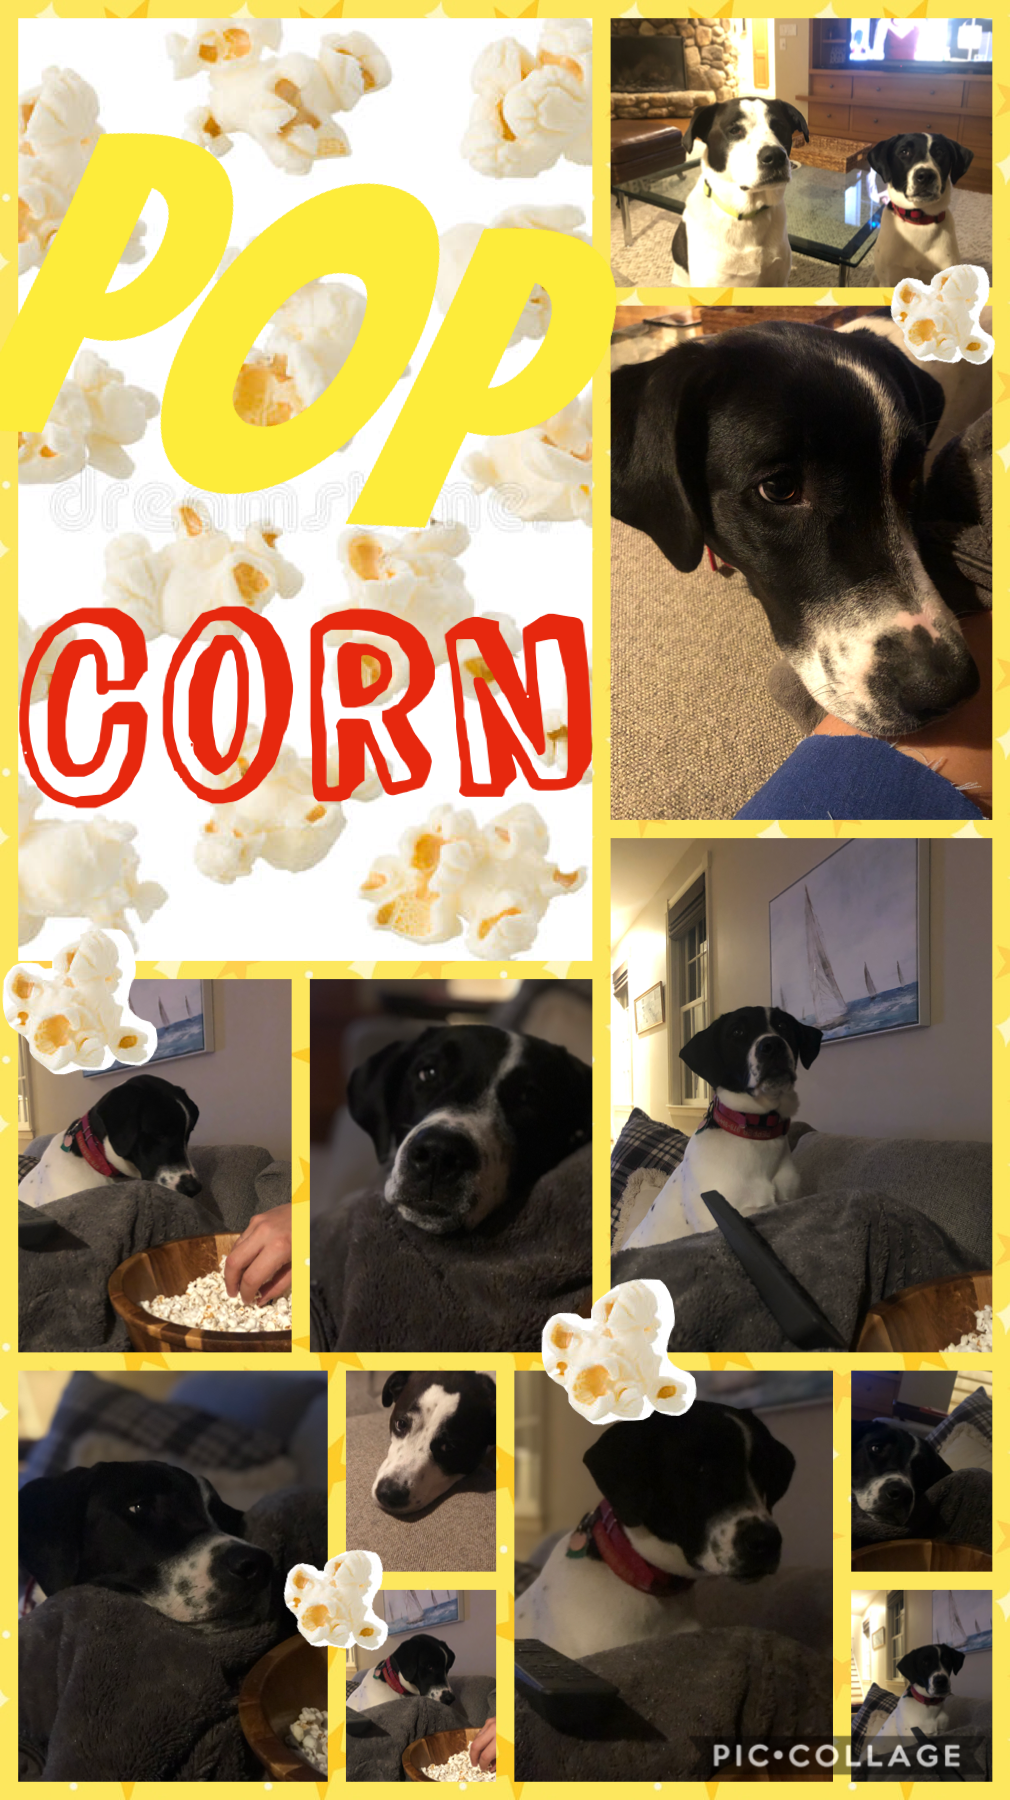 My dogs faces when they see popcorn 😂😂😂😂😂